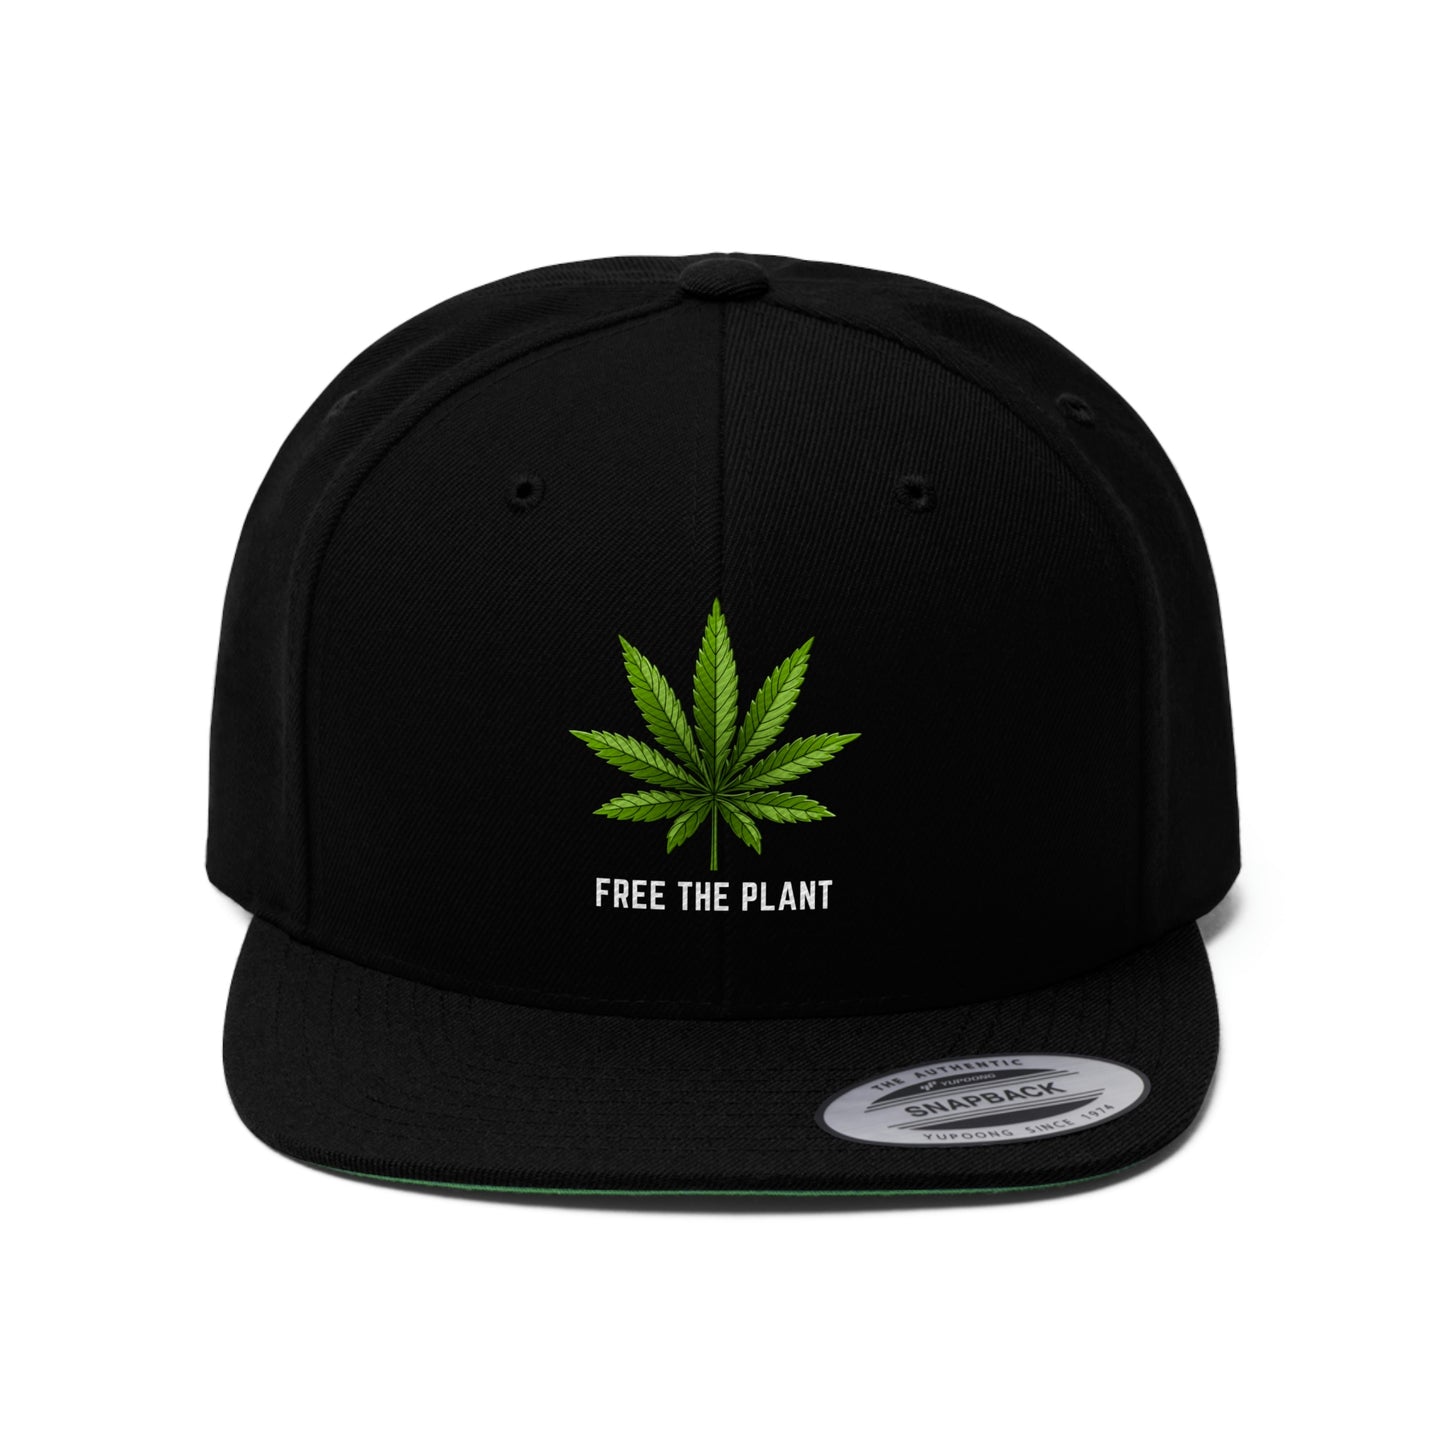 Close up of the all black Free The Plant Marijuana Snapback Hat with green weed leaf